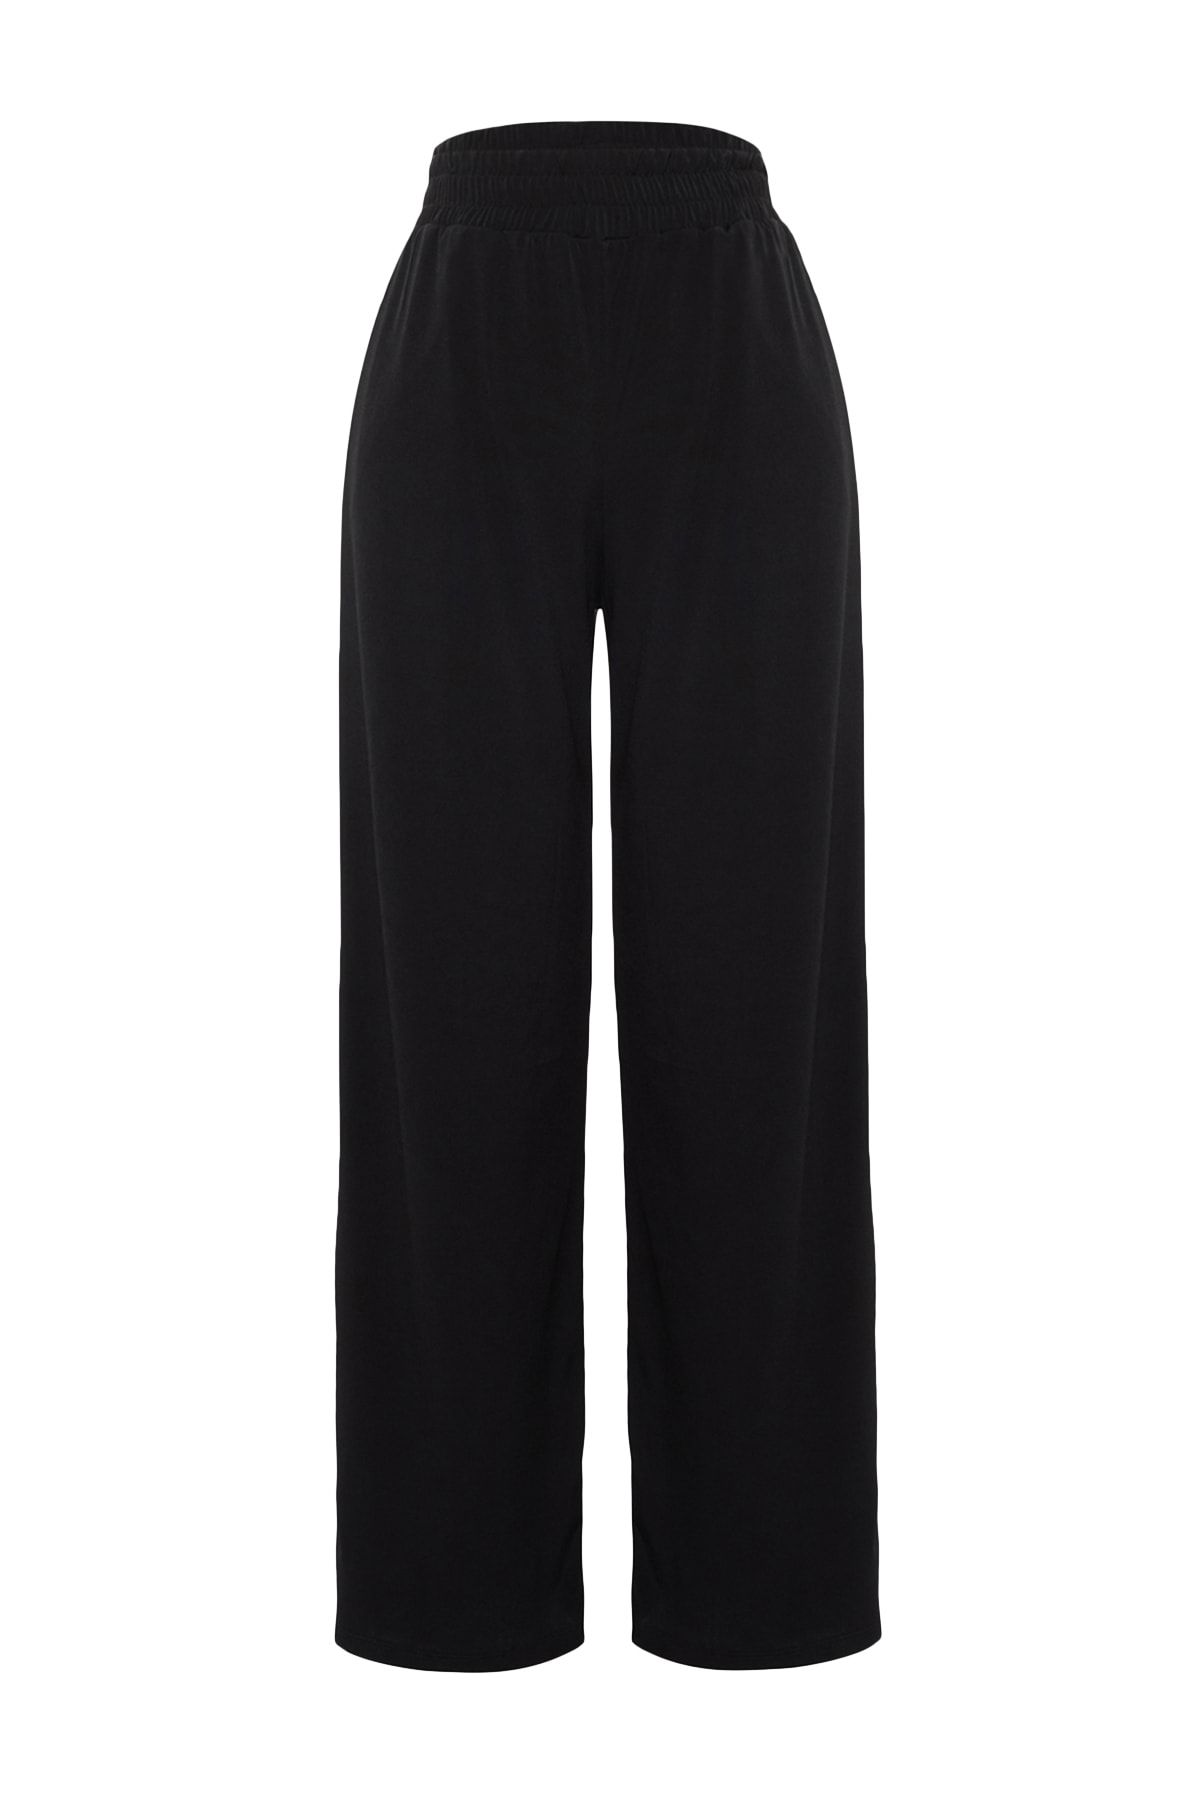 Trendyol Collection Black Wide Leg/Relaxed Cut High Waist Stretchy ...